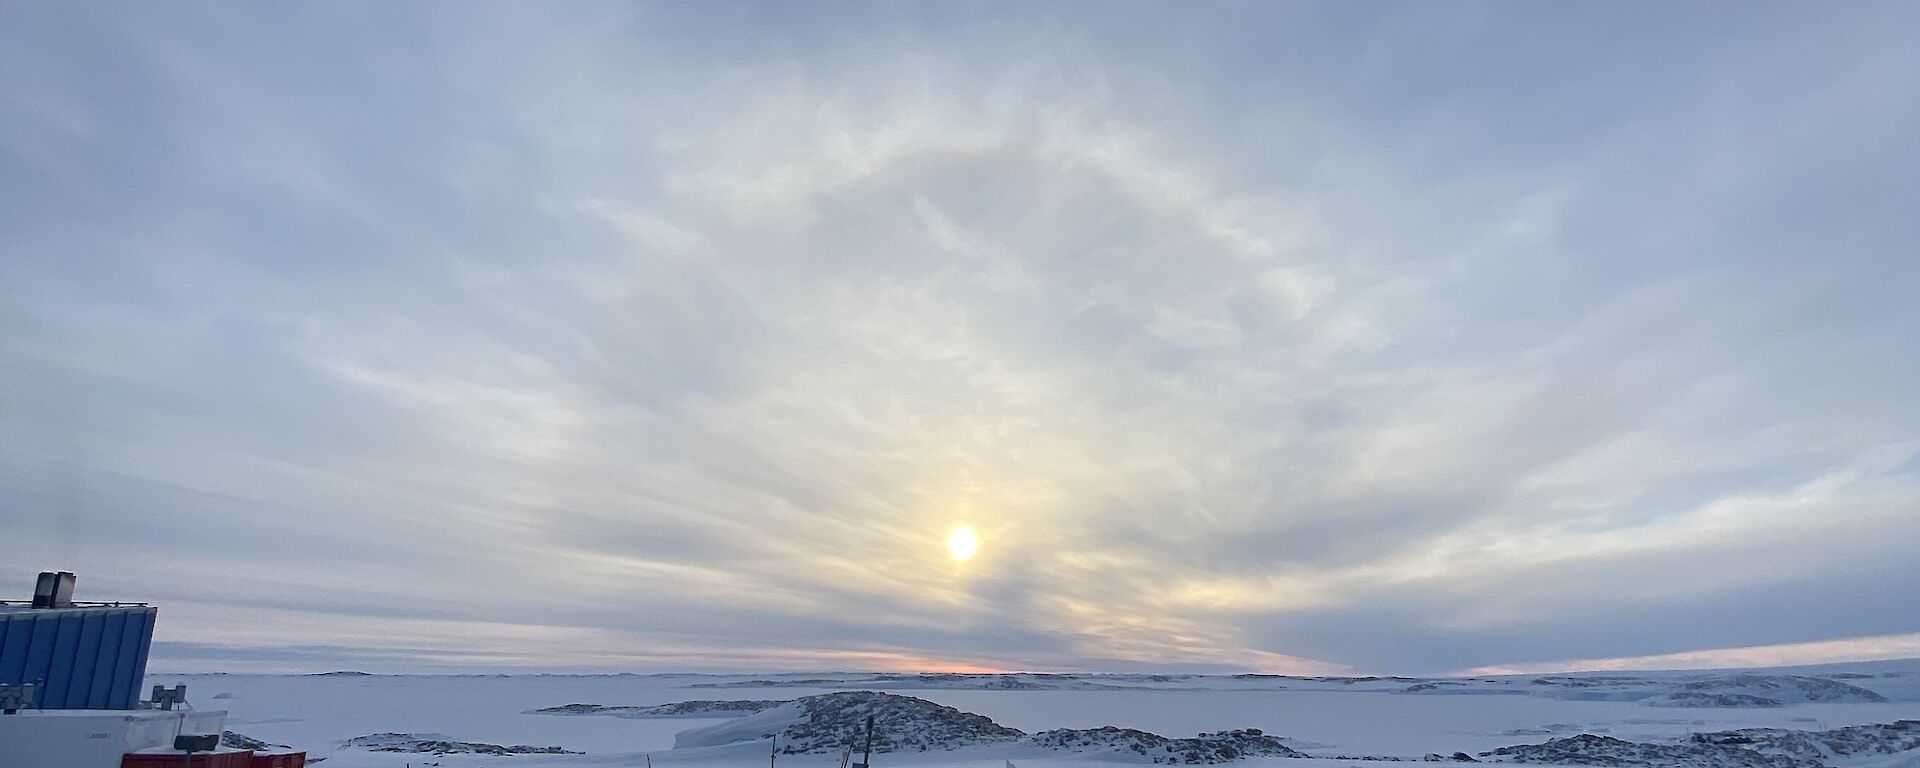 A snowy scene with a cloudy sky in the distance.  A sun halo is peeping through the cloud.